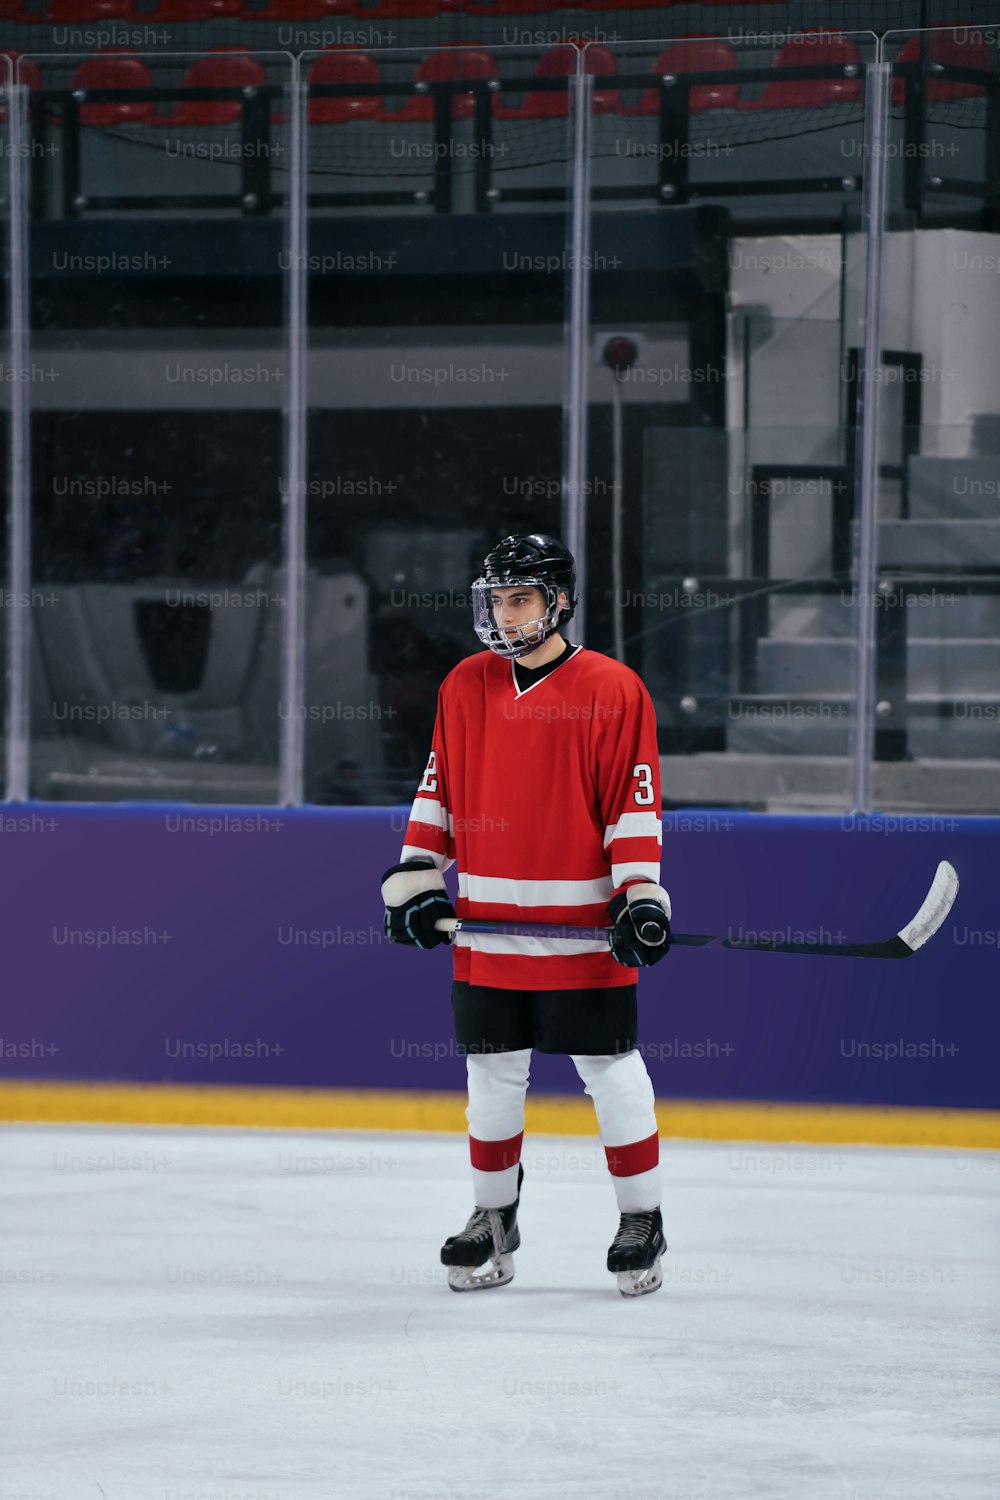 a hockey player standing on the ice with a stick